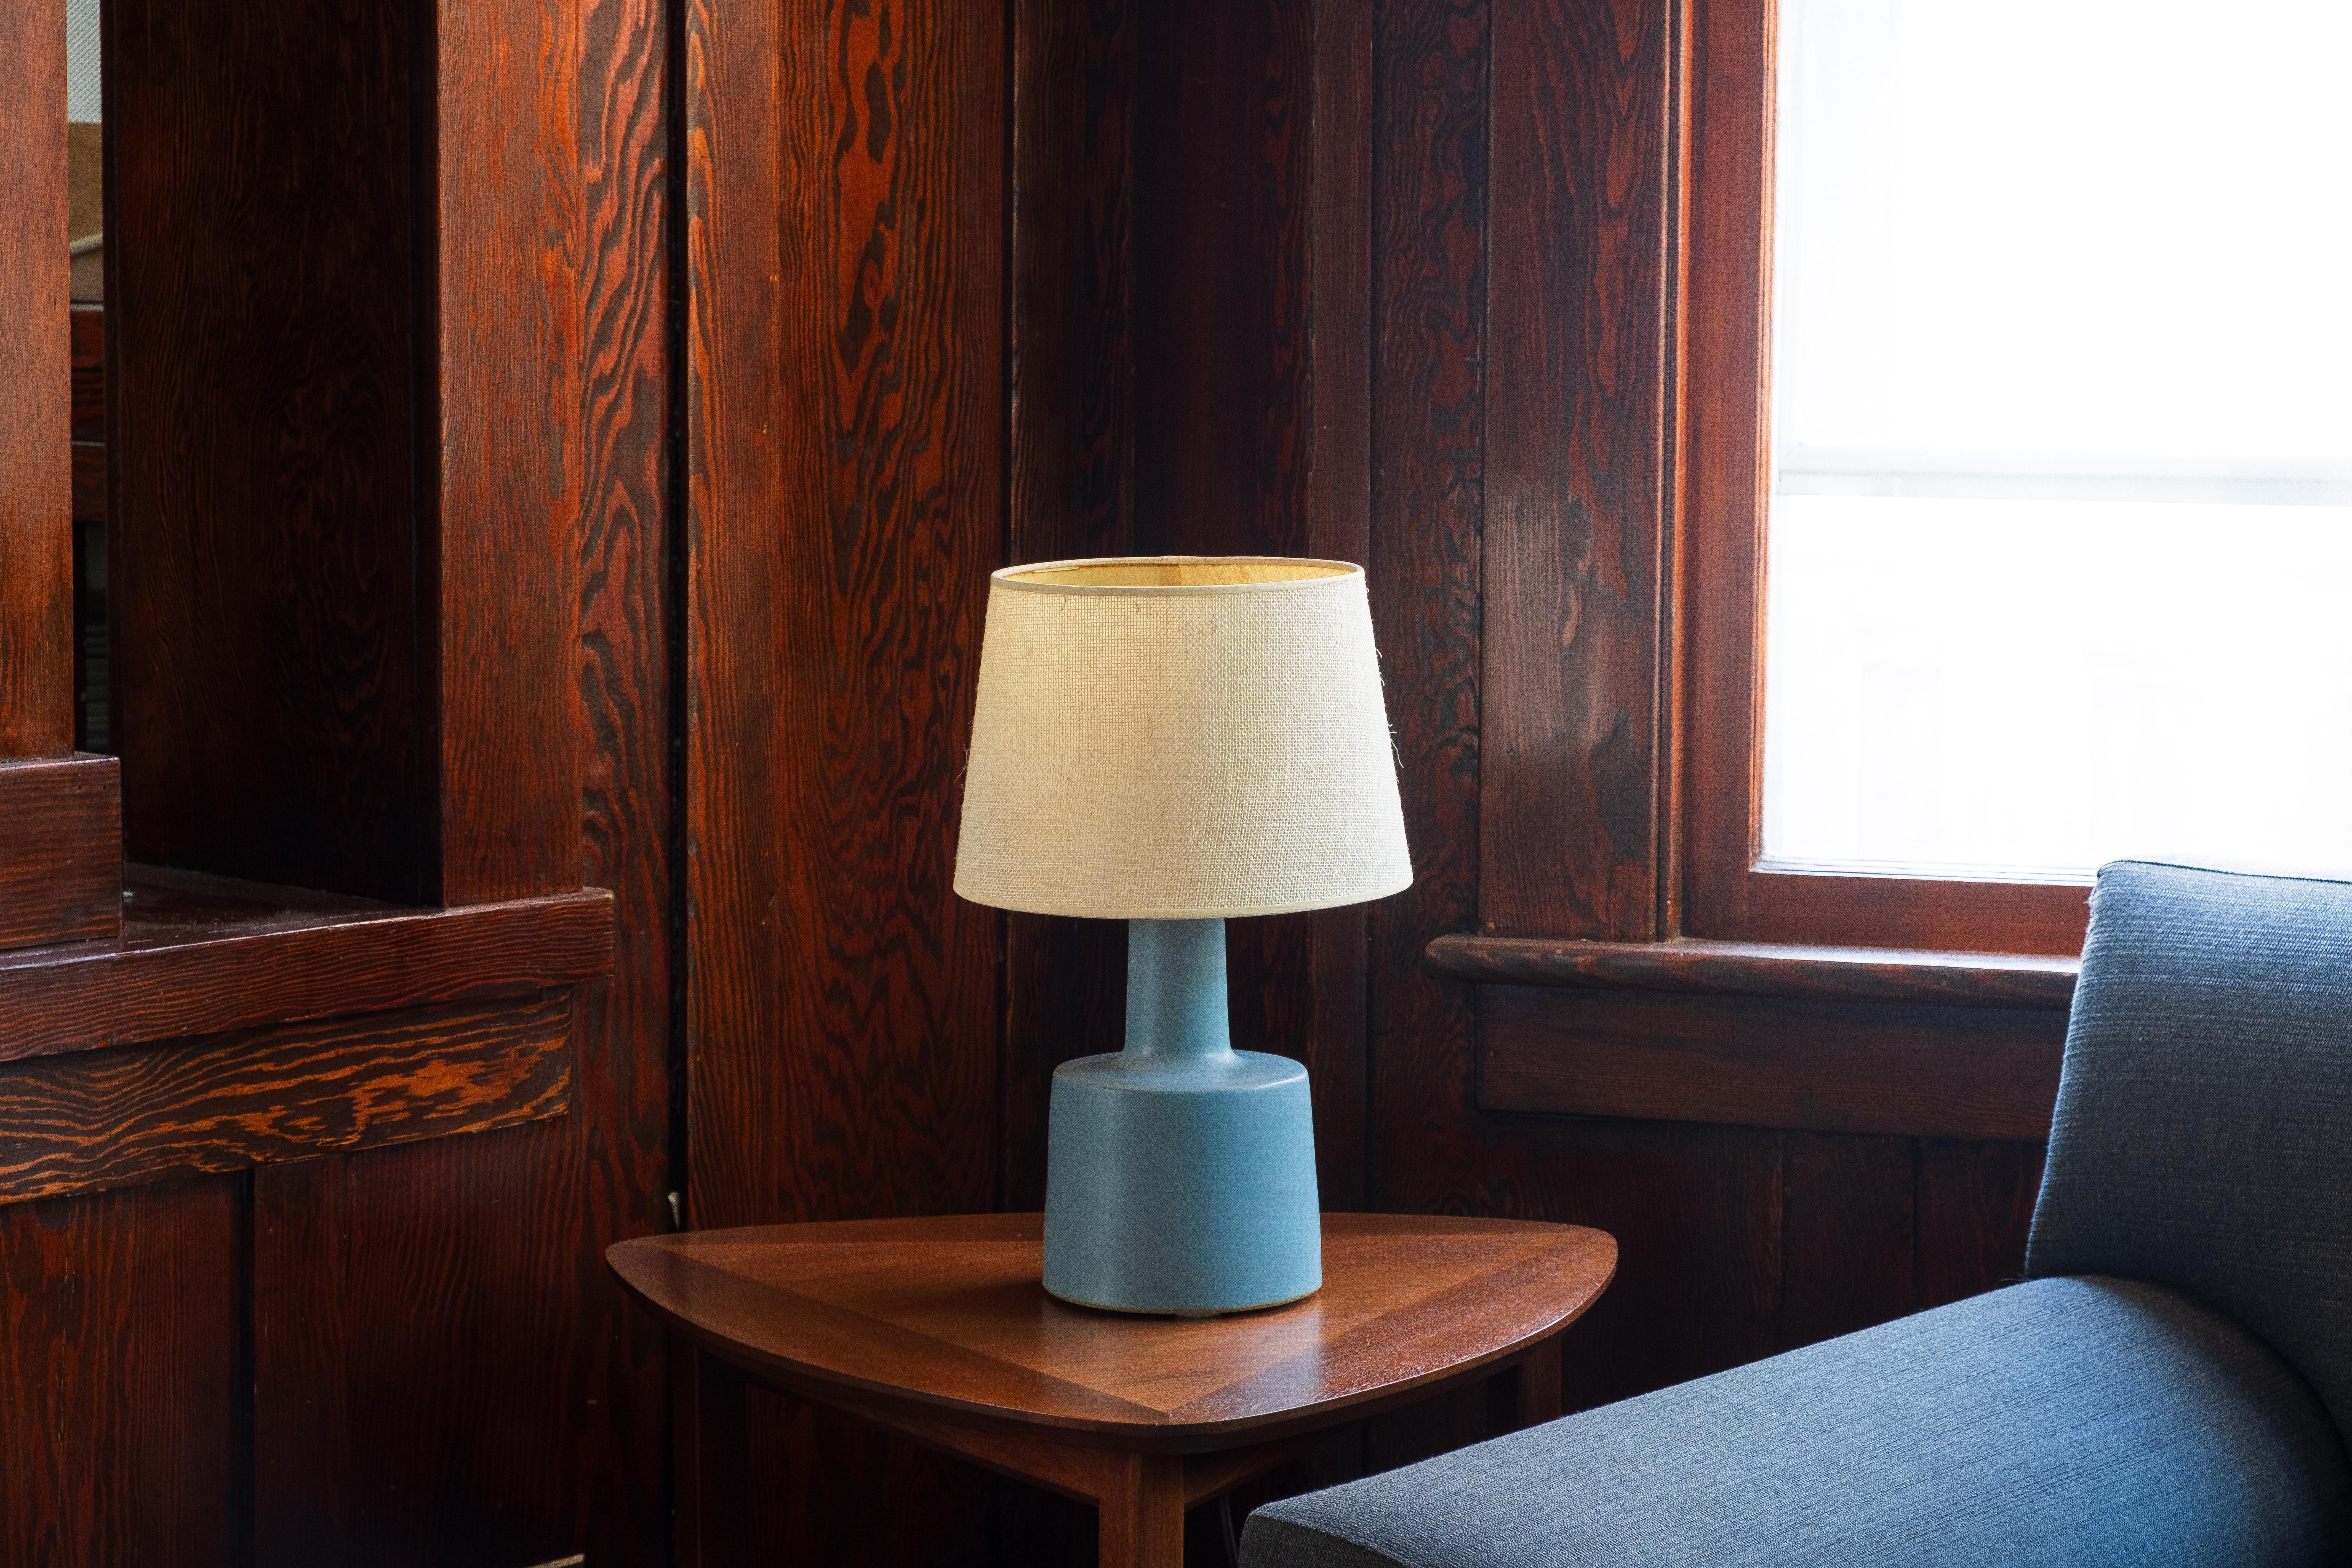 What is it?
—
These signed Martz model 105 lamps comes in a matte robin's egg blue glaze with darker flecks and specks of browns and black. They will arrive with a new set of burlap shades that exactly match the dimensions and construction of the